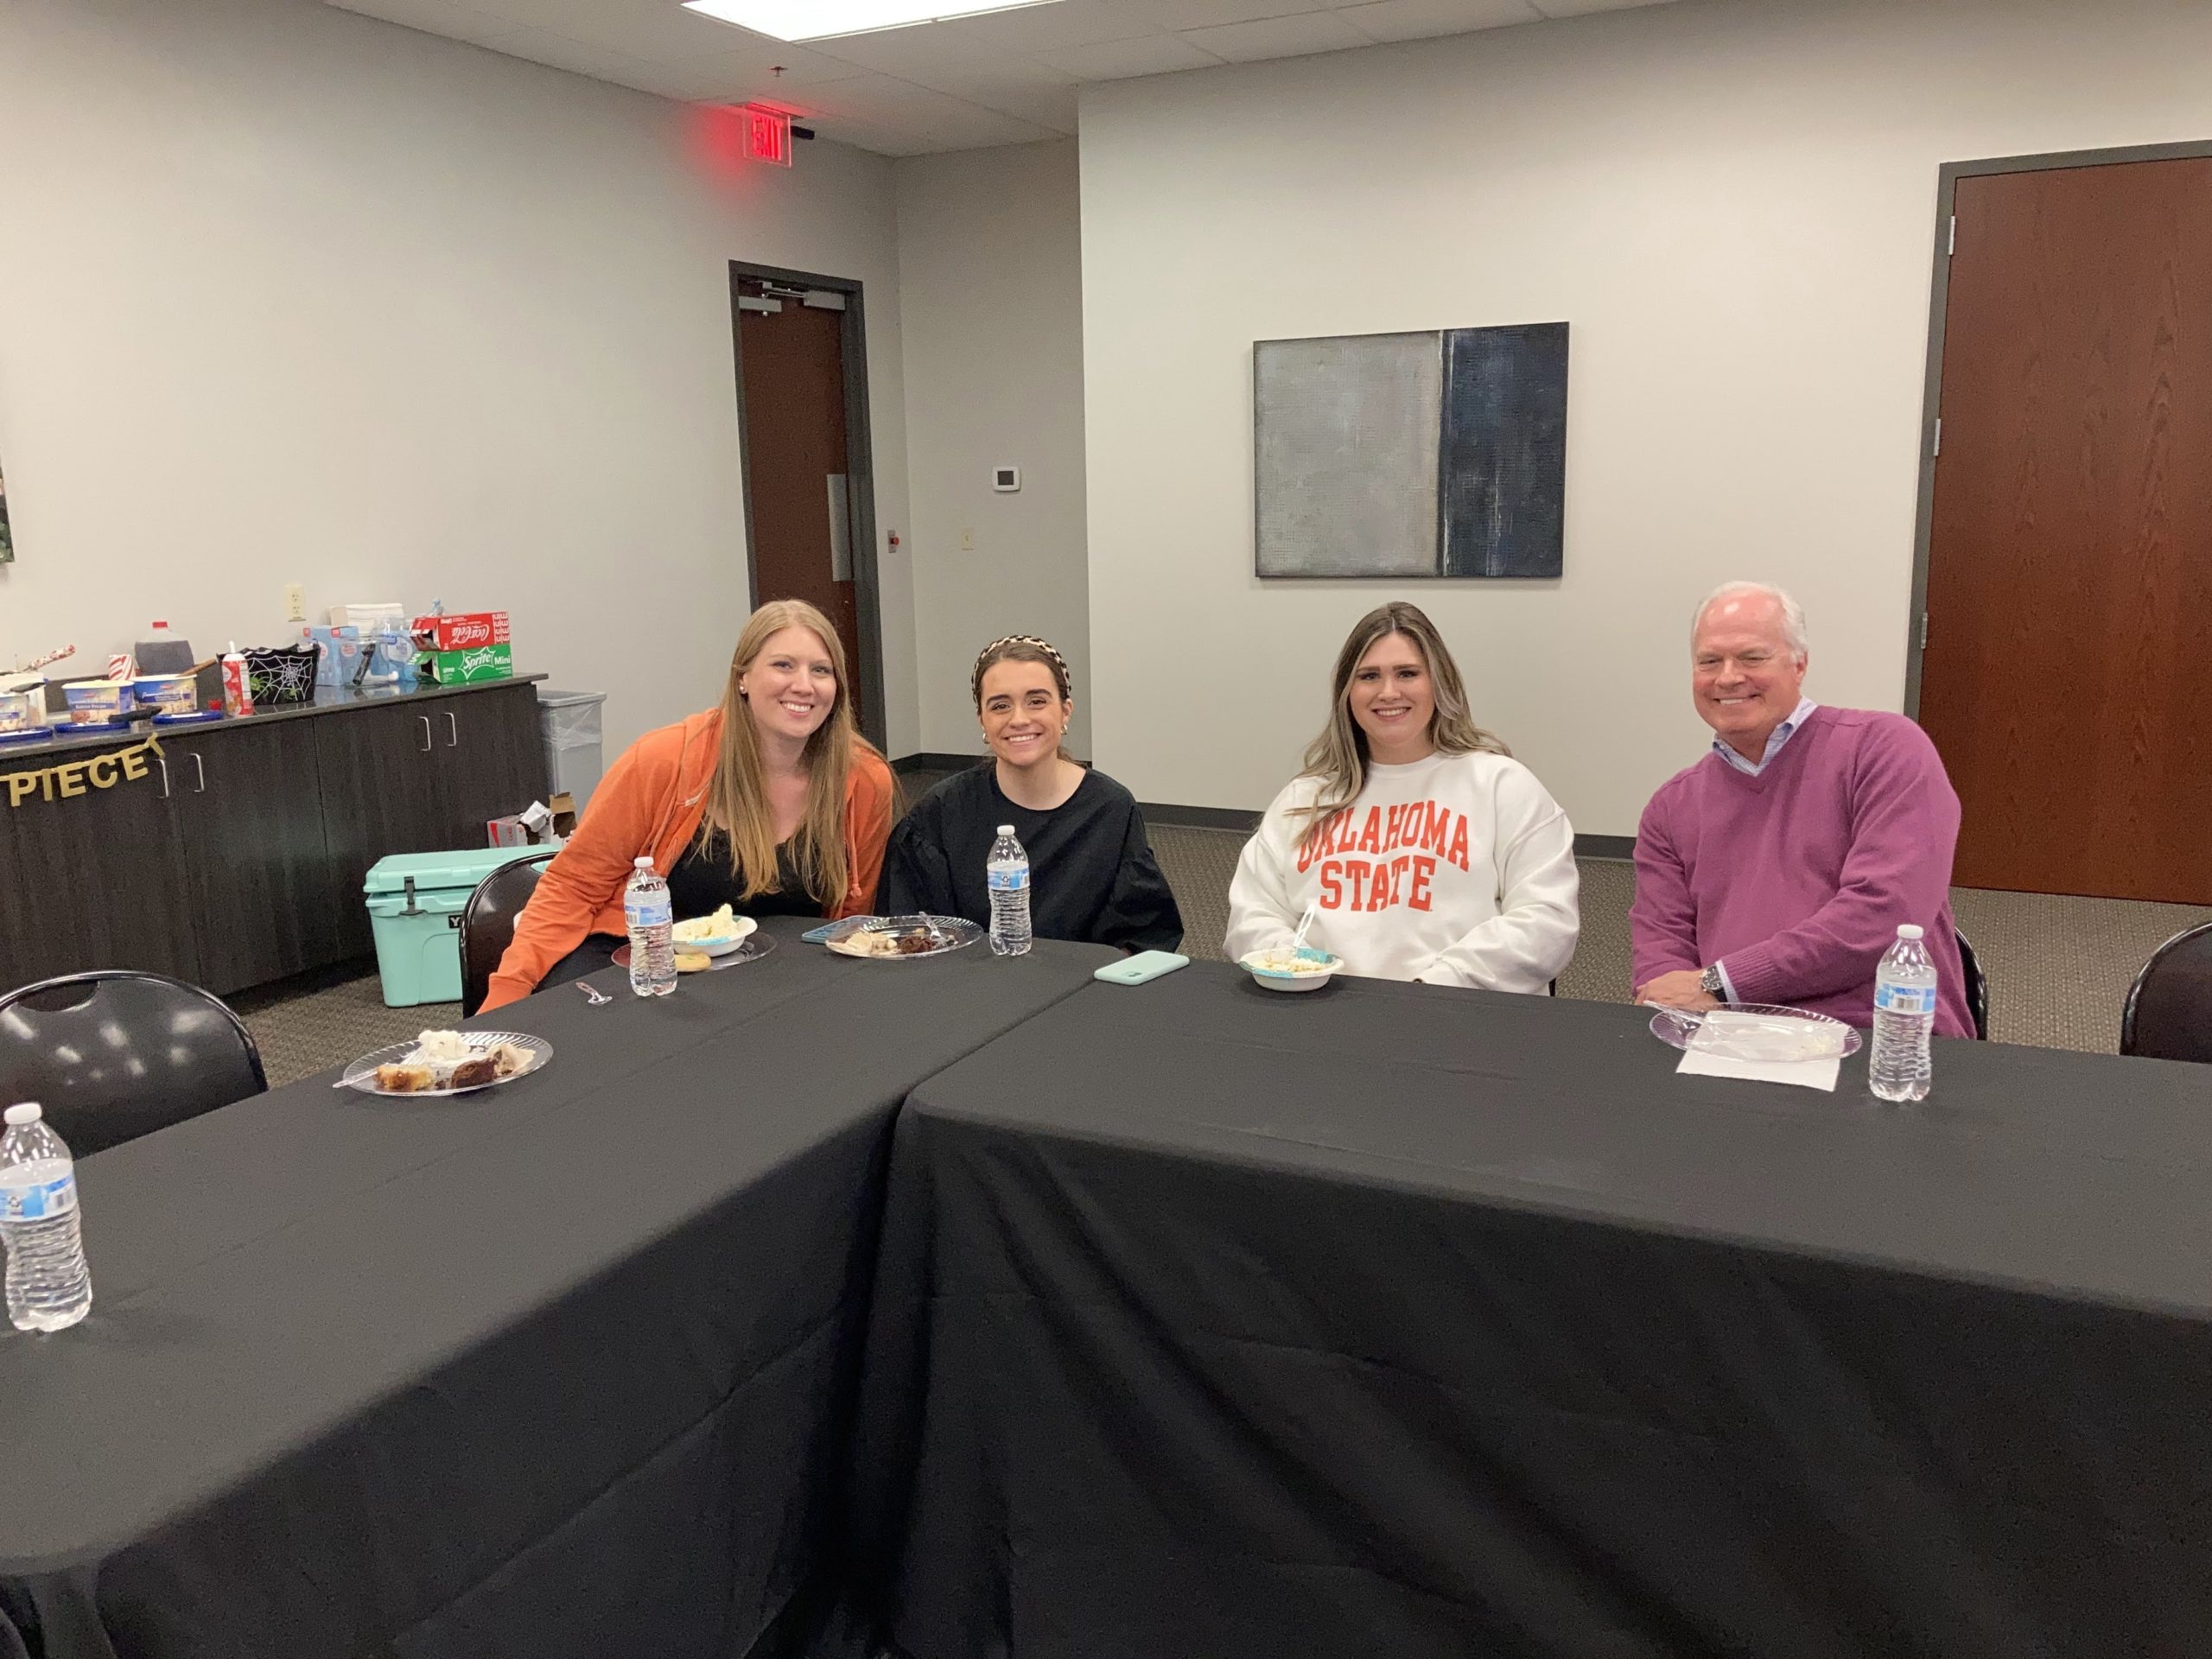 Kyle, Madison, Chelsea and Steve sitting at a table during an office event.